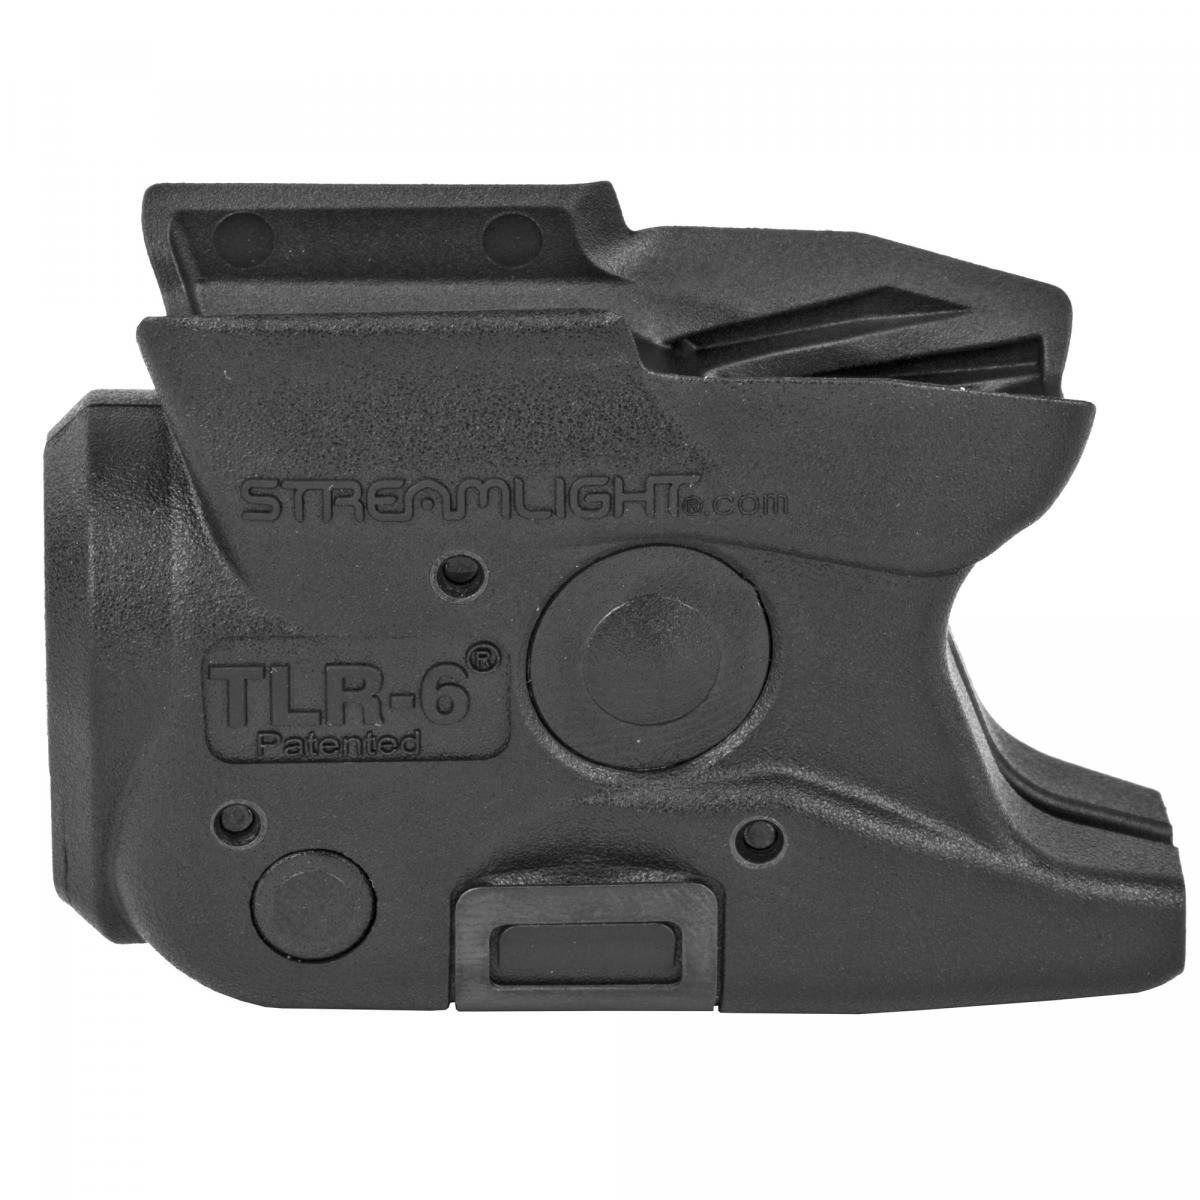 Streamlight TLR-6 S&W M&P Shield Without Laser - 4Shooters